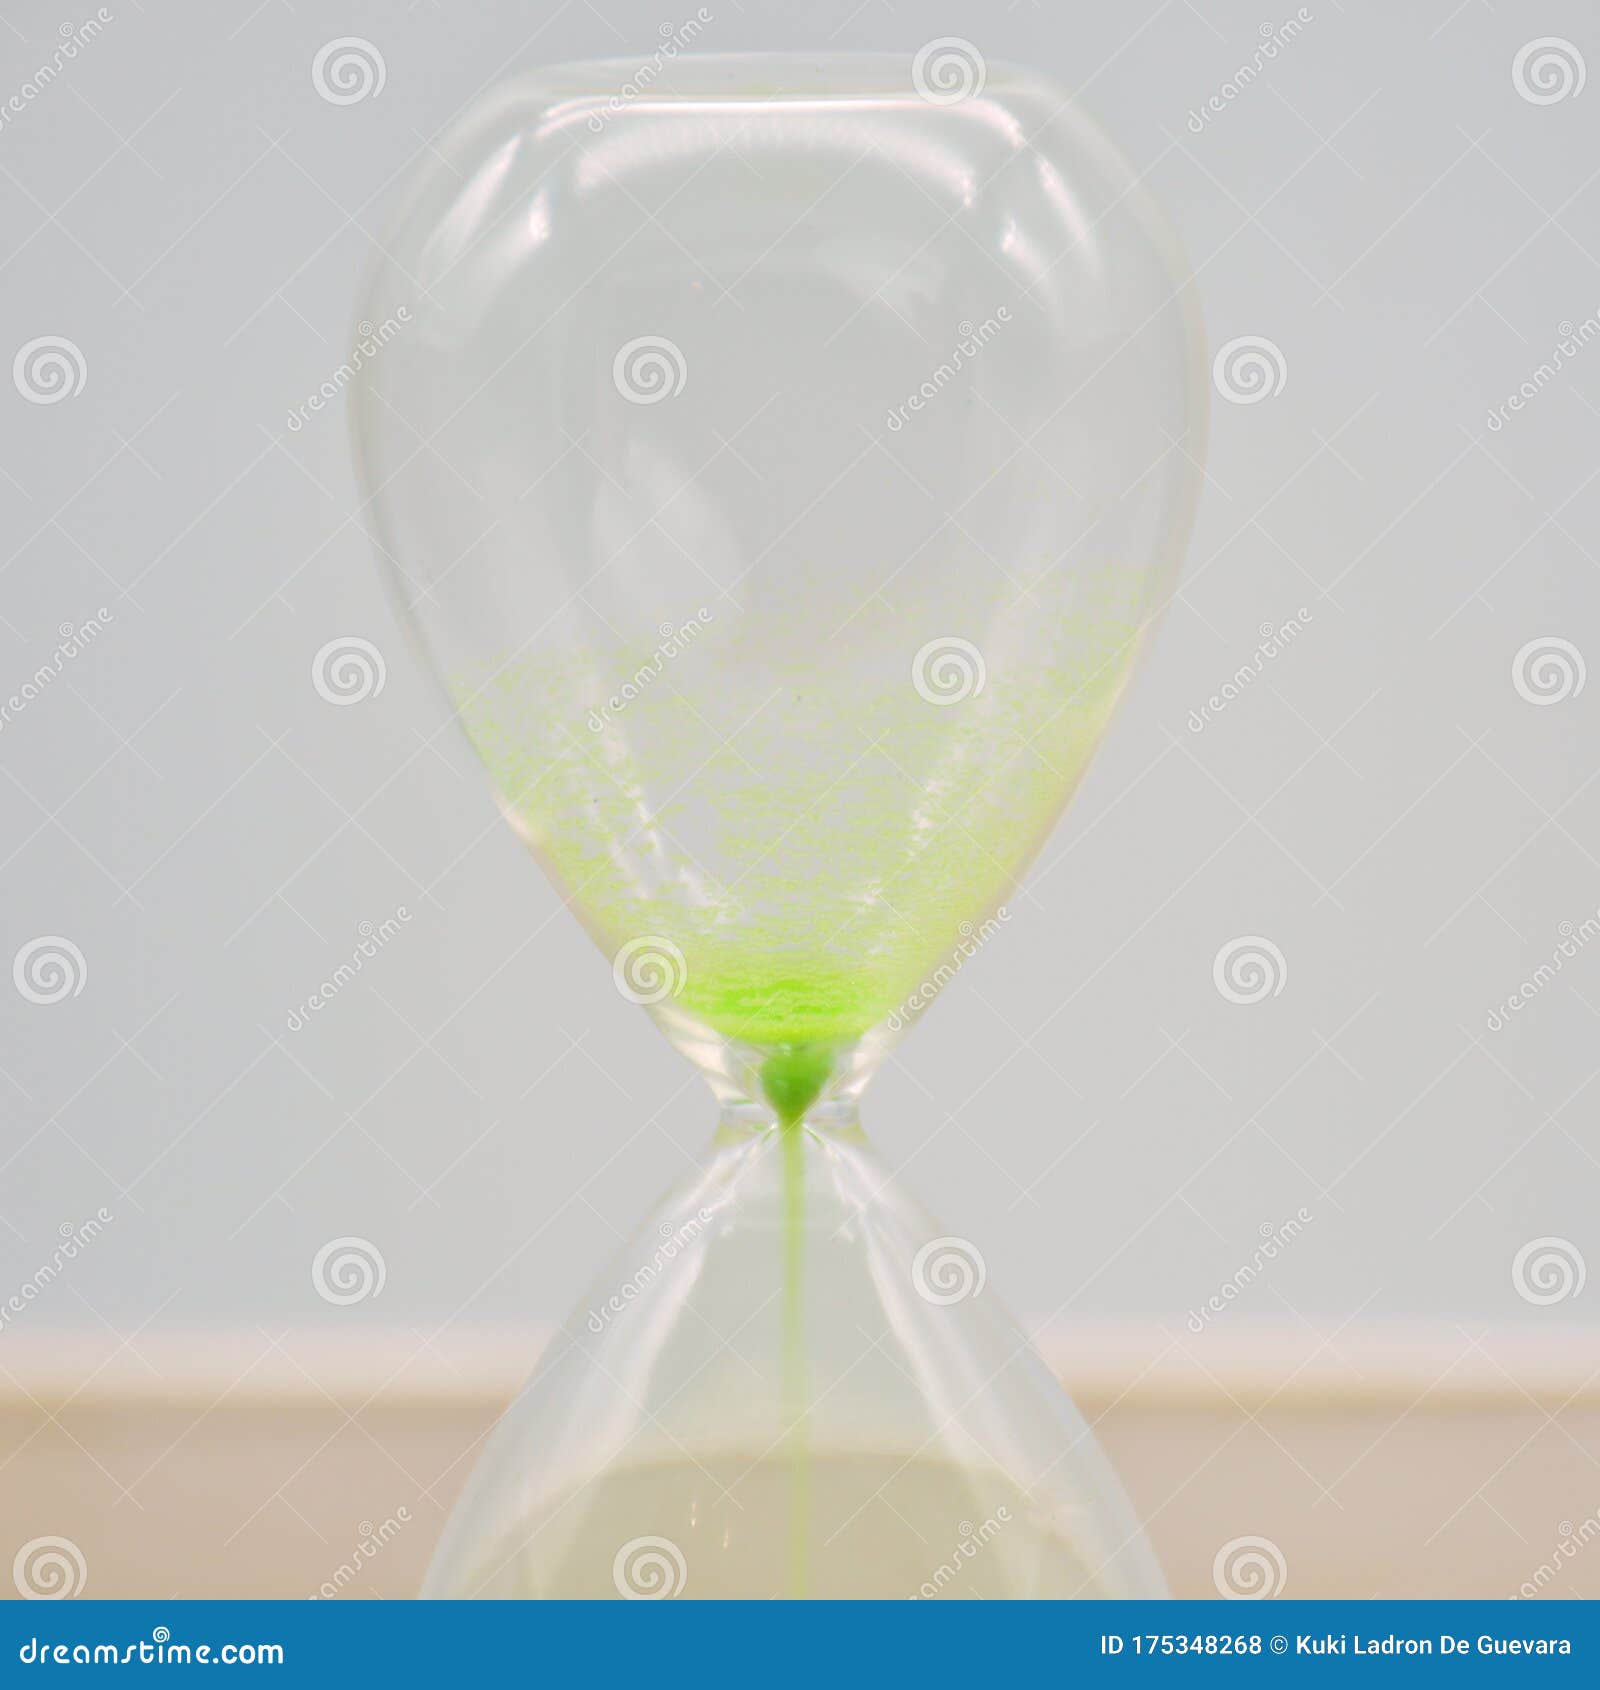 green hourglass, counting time